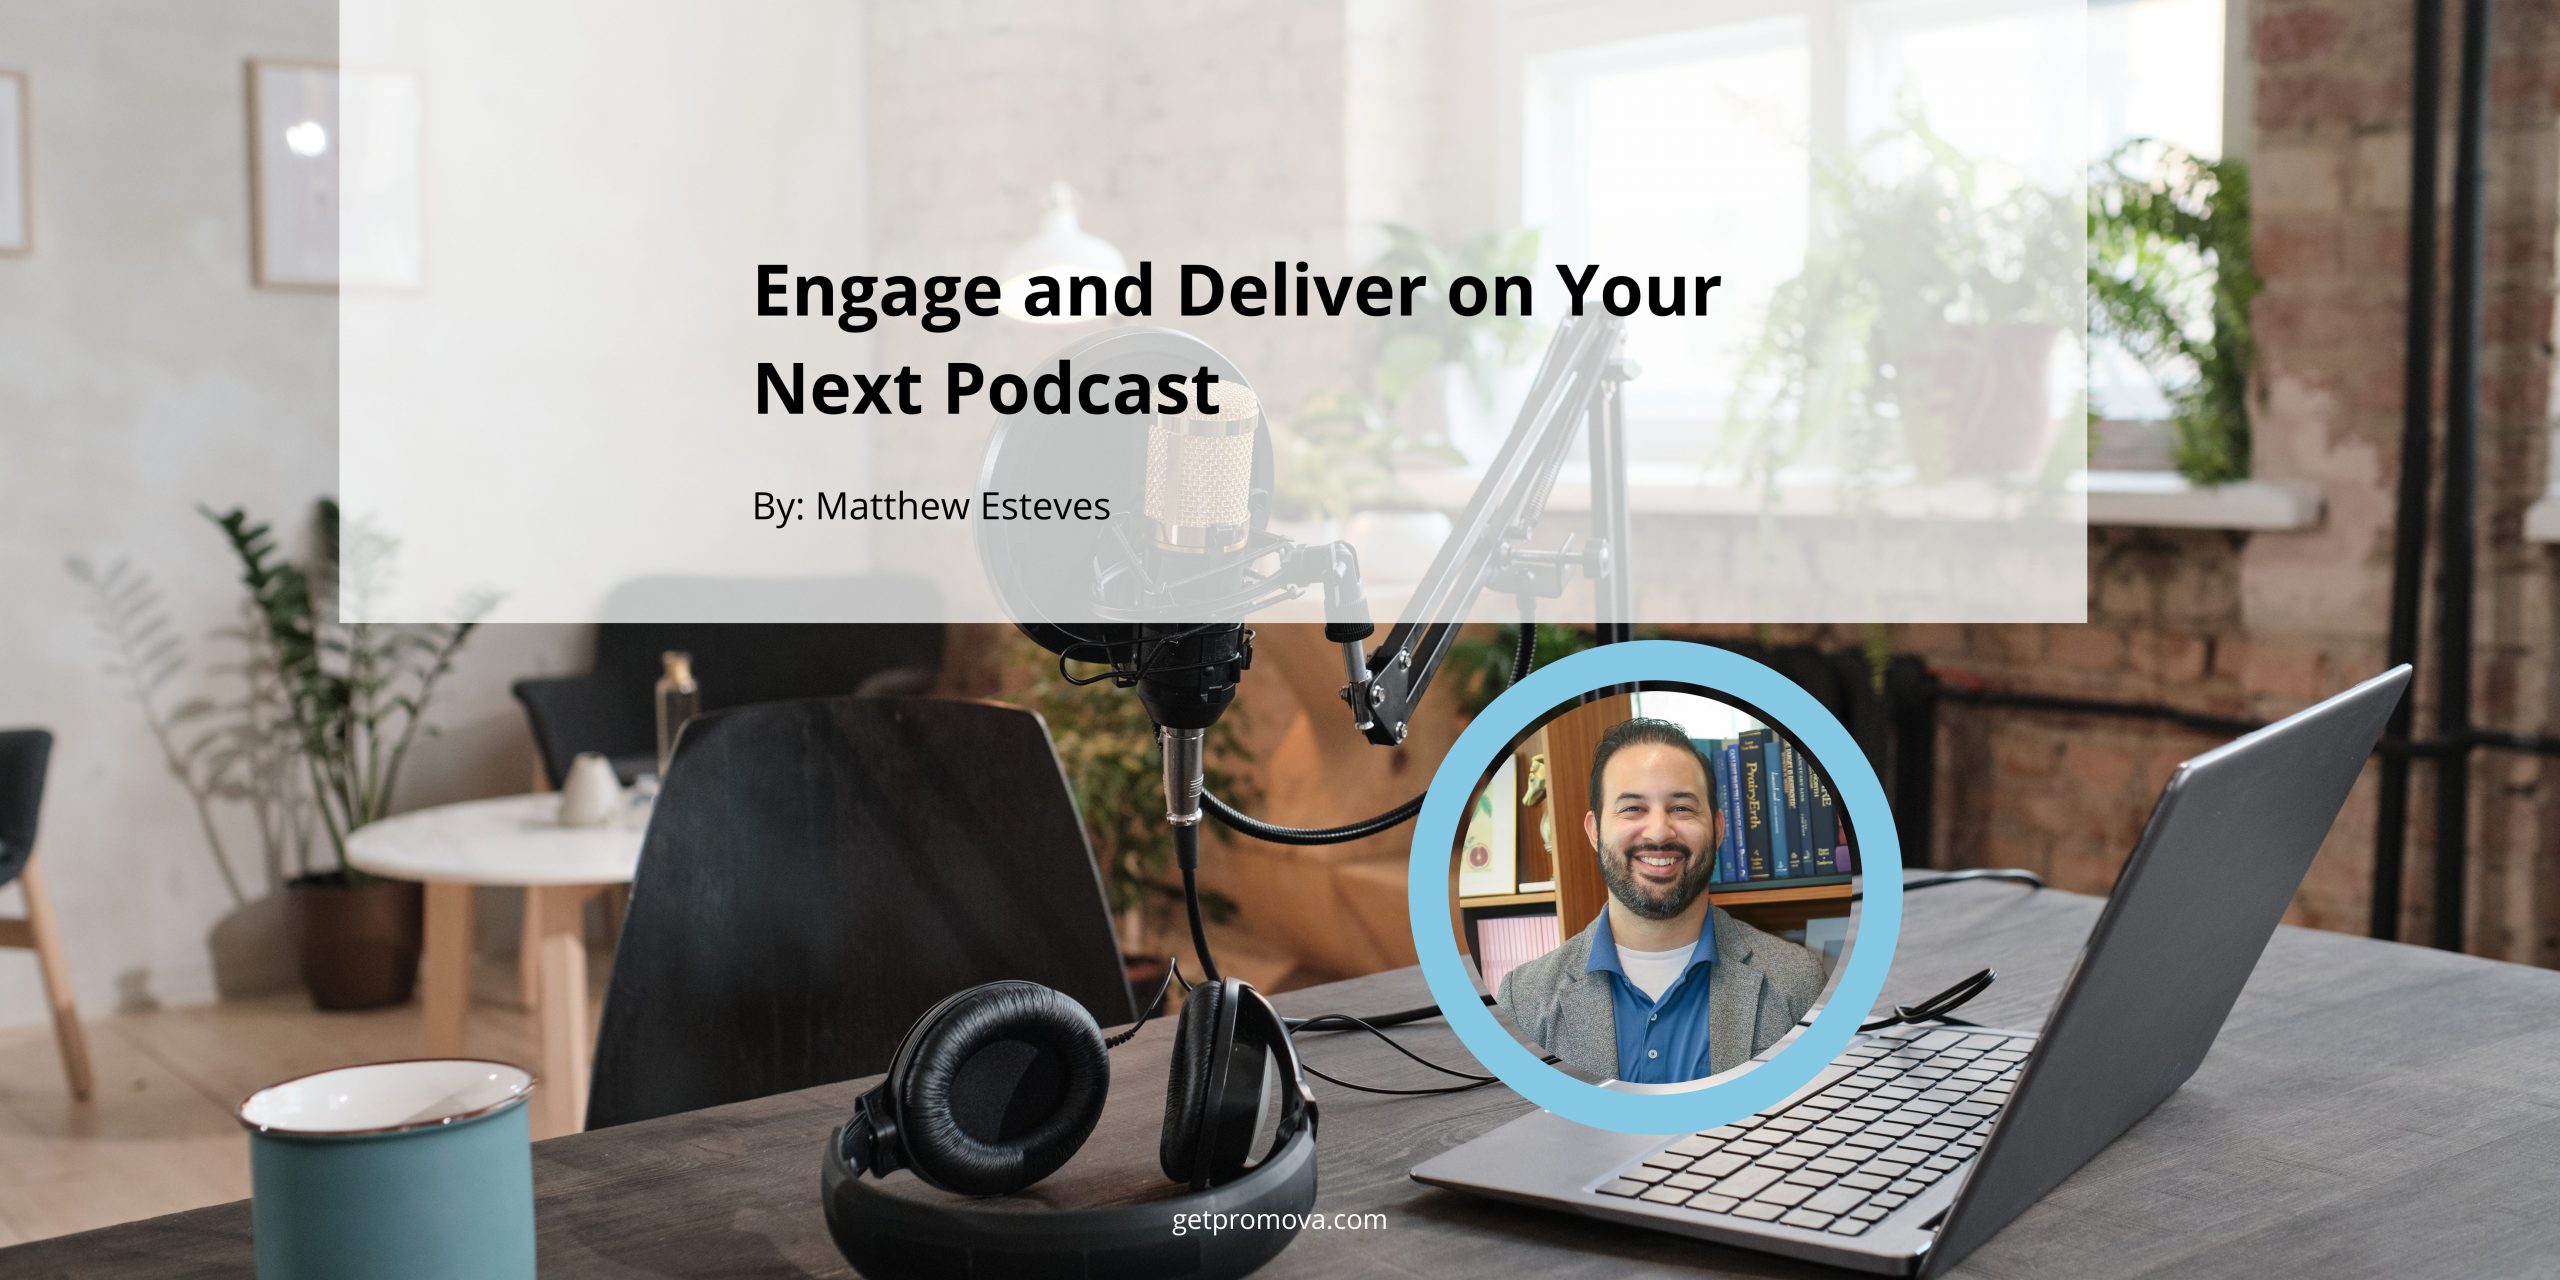 Featured image for “Engage and Deliver on Your Next Podcast”